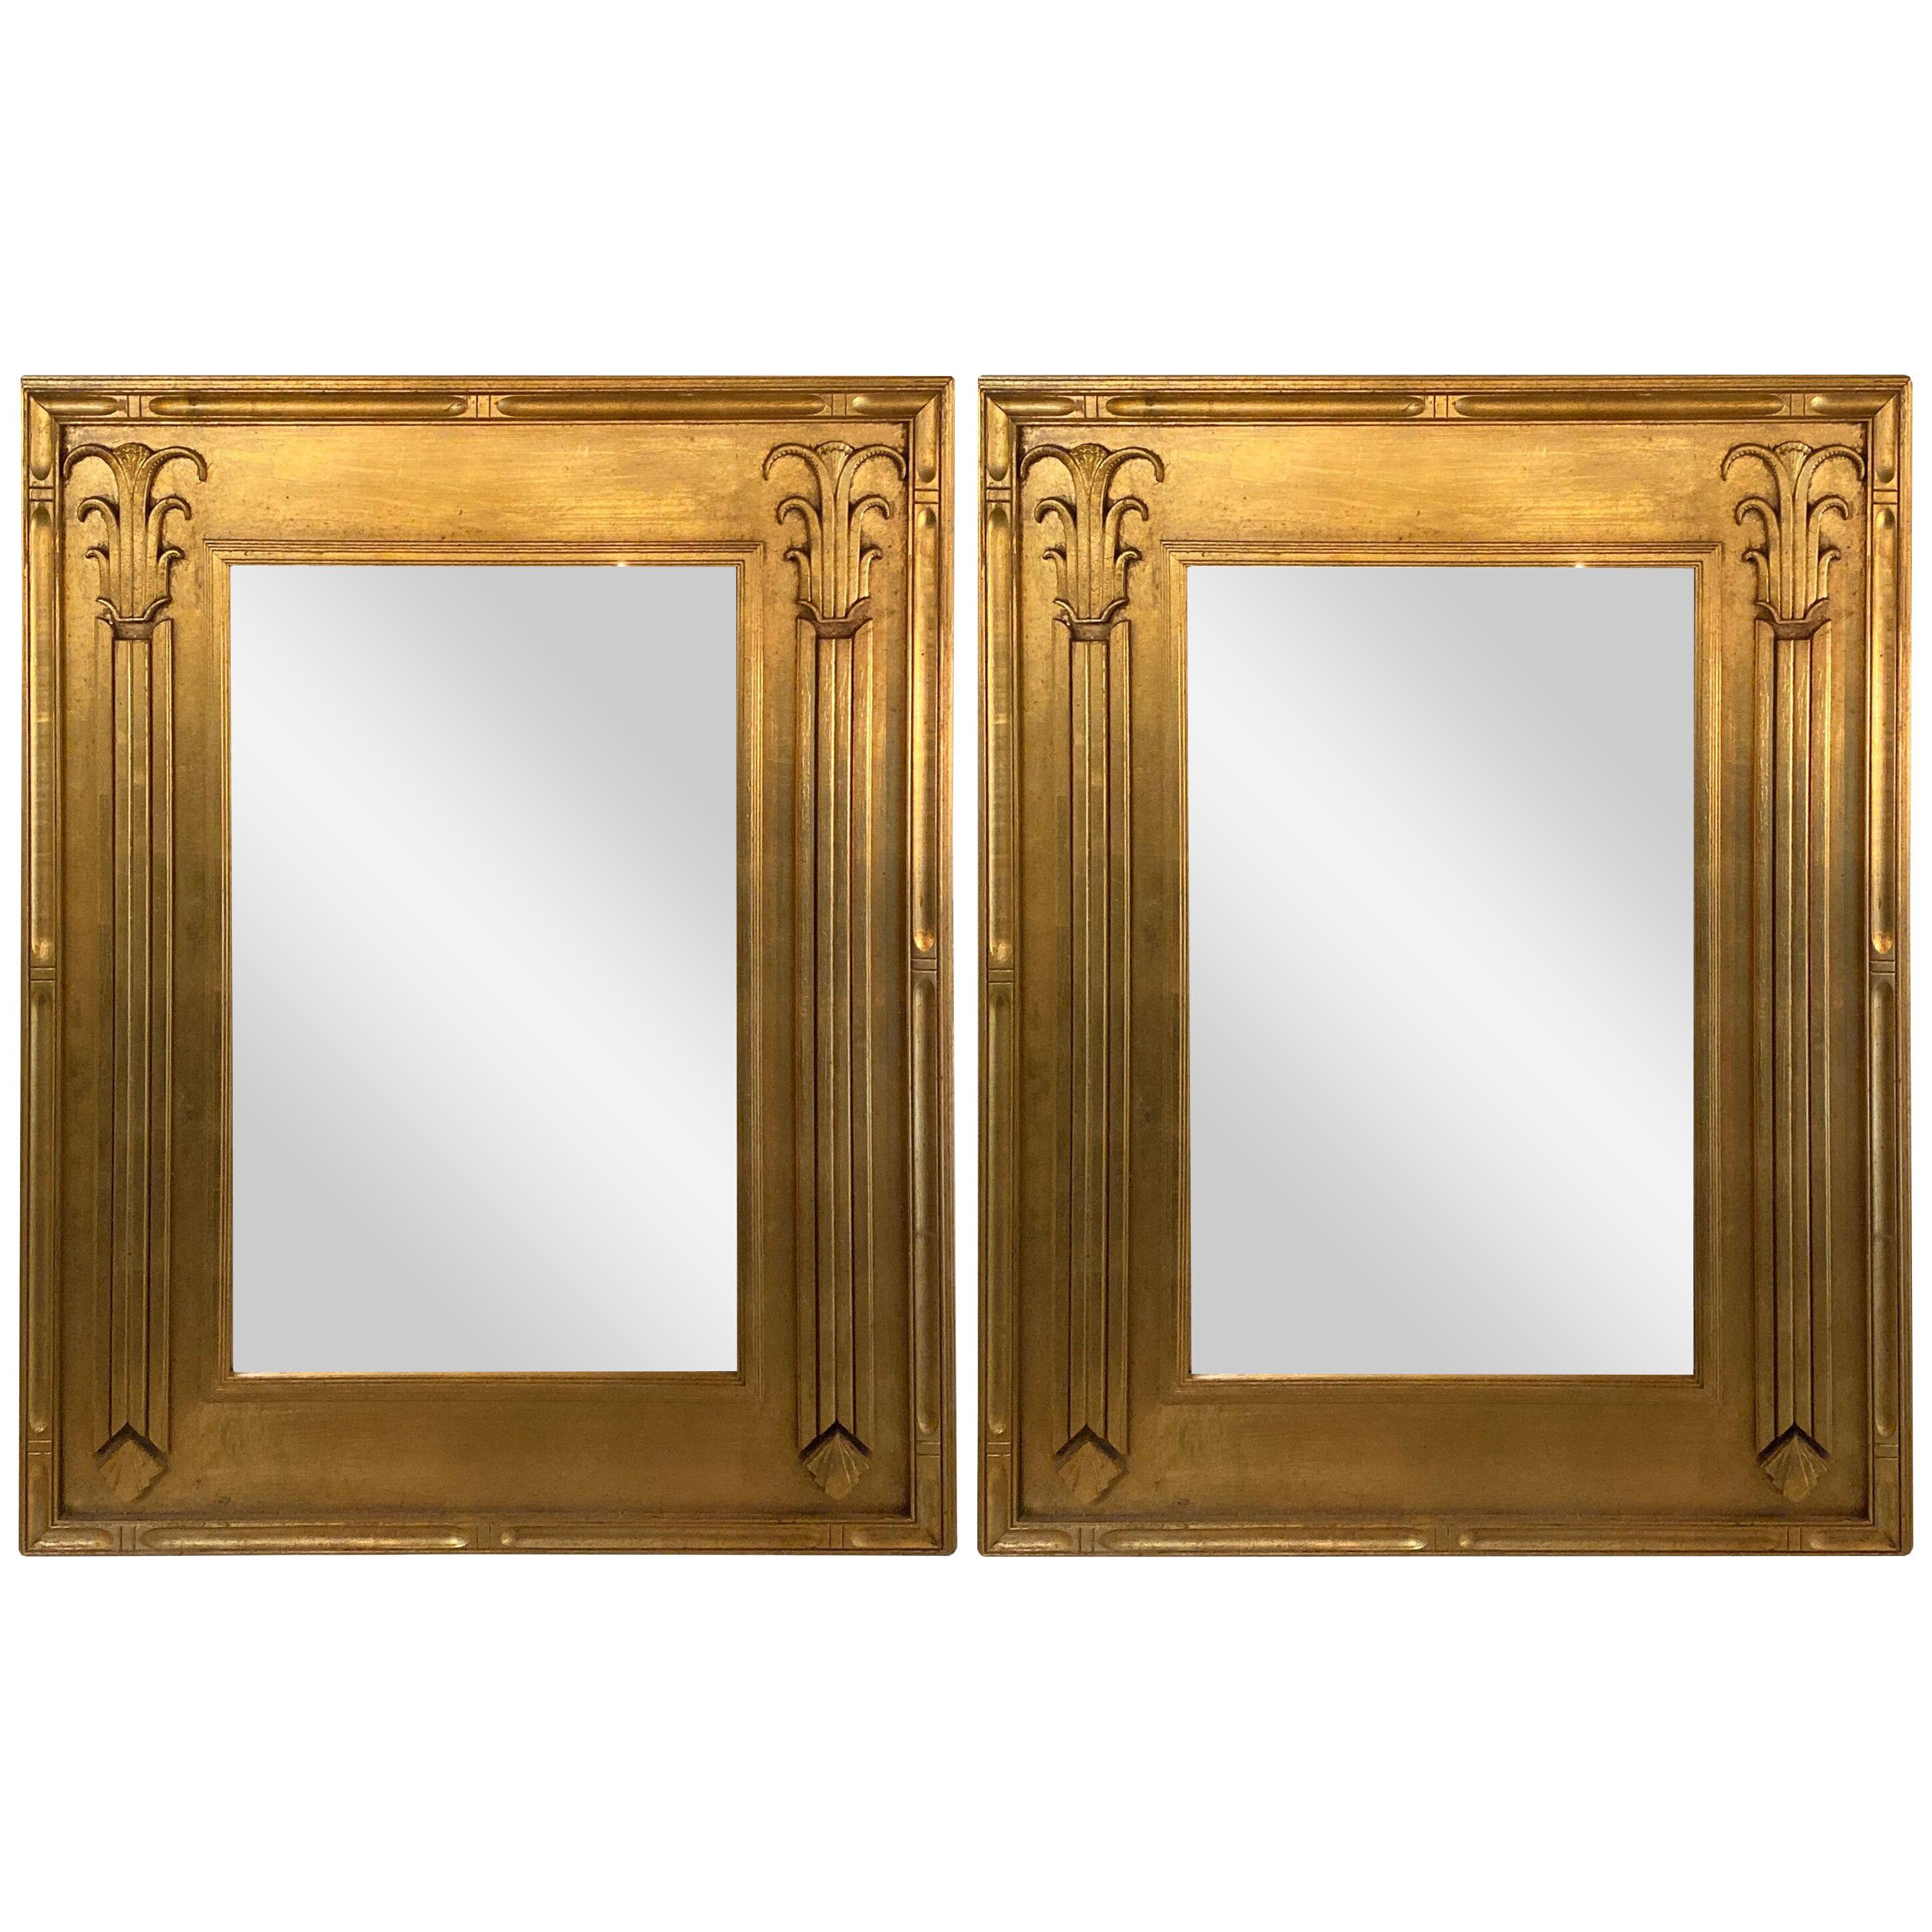 Pair of Art Deco Style Gilt Gold Architecturally Carved Wall or Console Mirrors